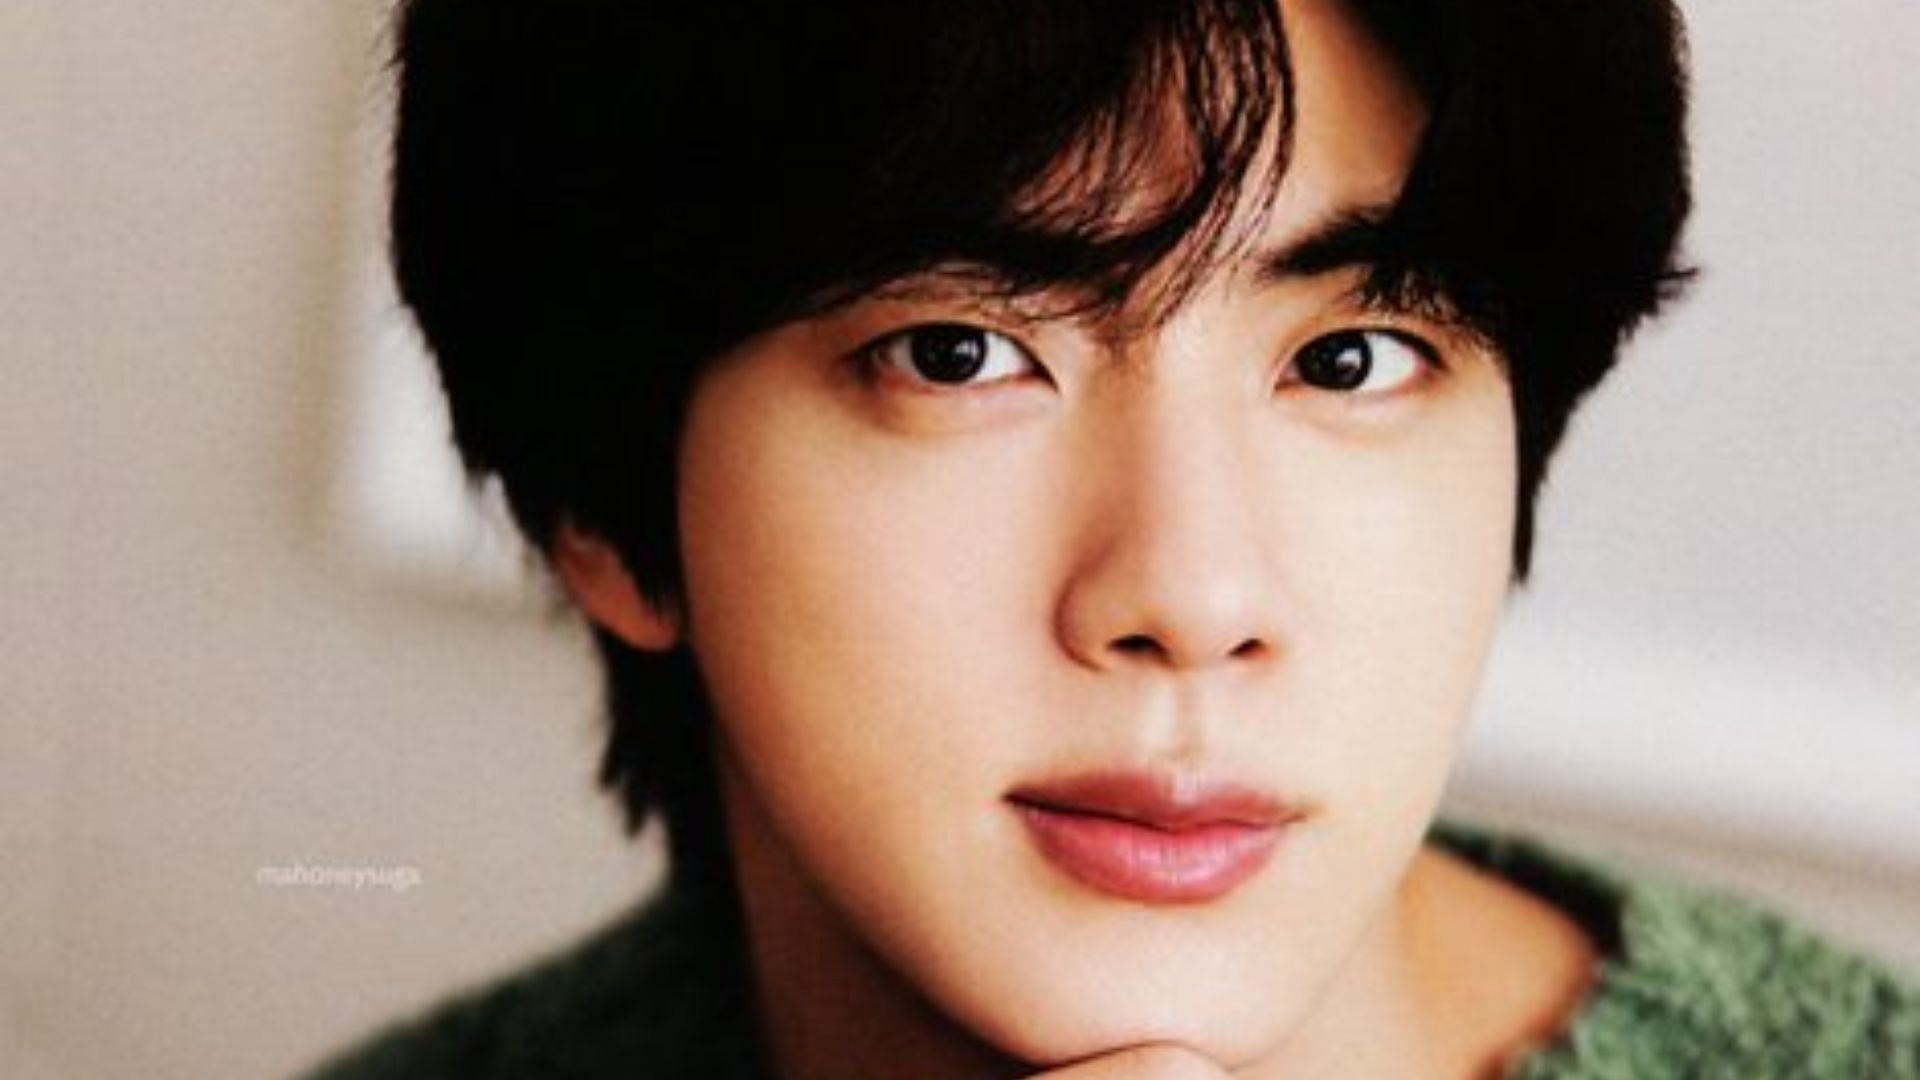 BTS Jin will reportedly be discharged from military (Image via Twitter/@mahoneysuga)